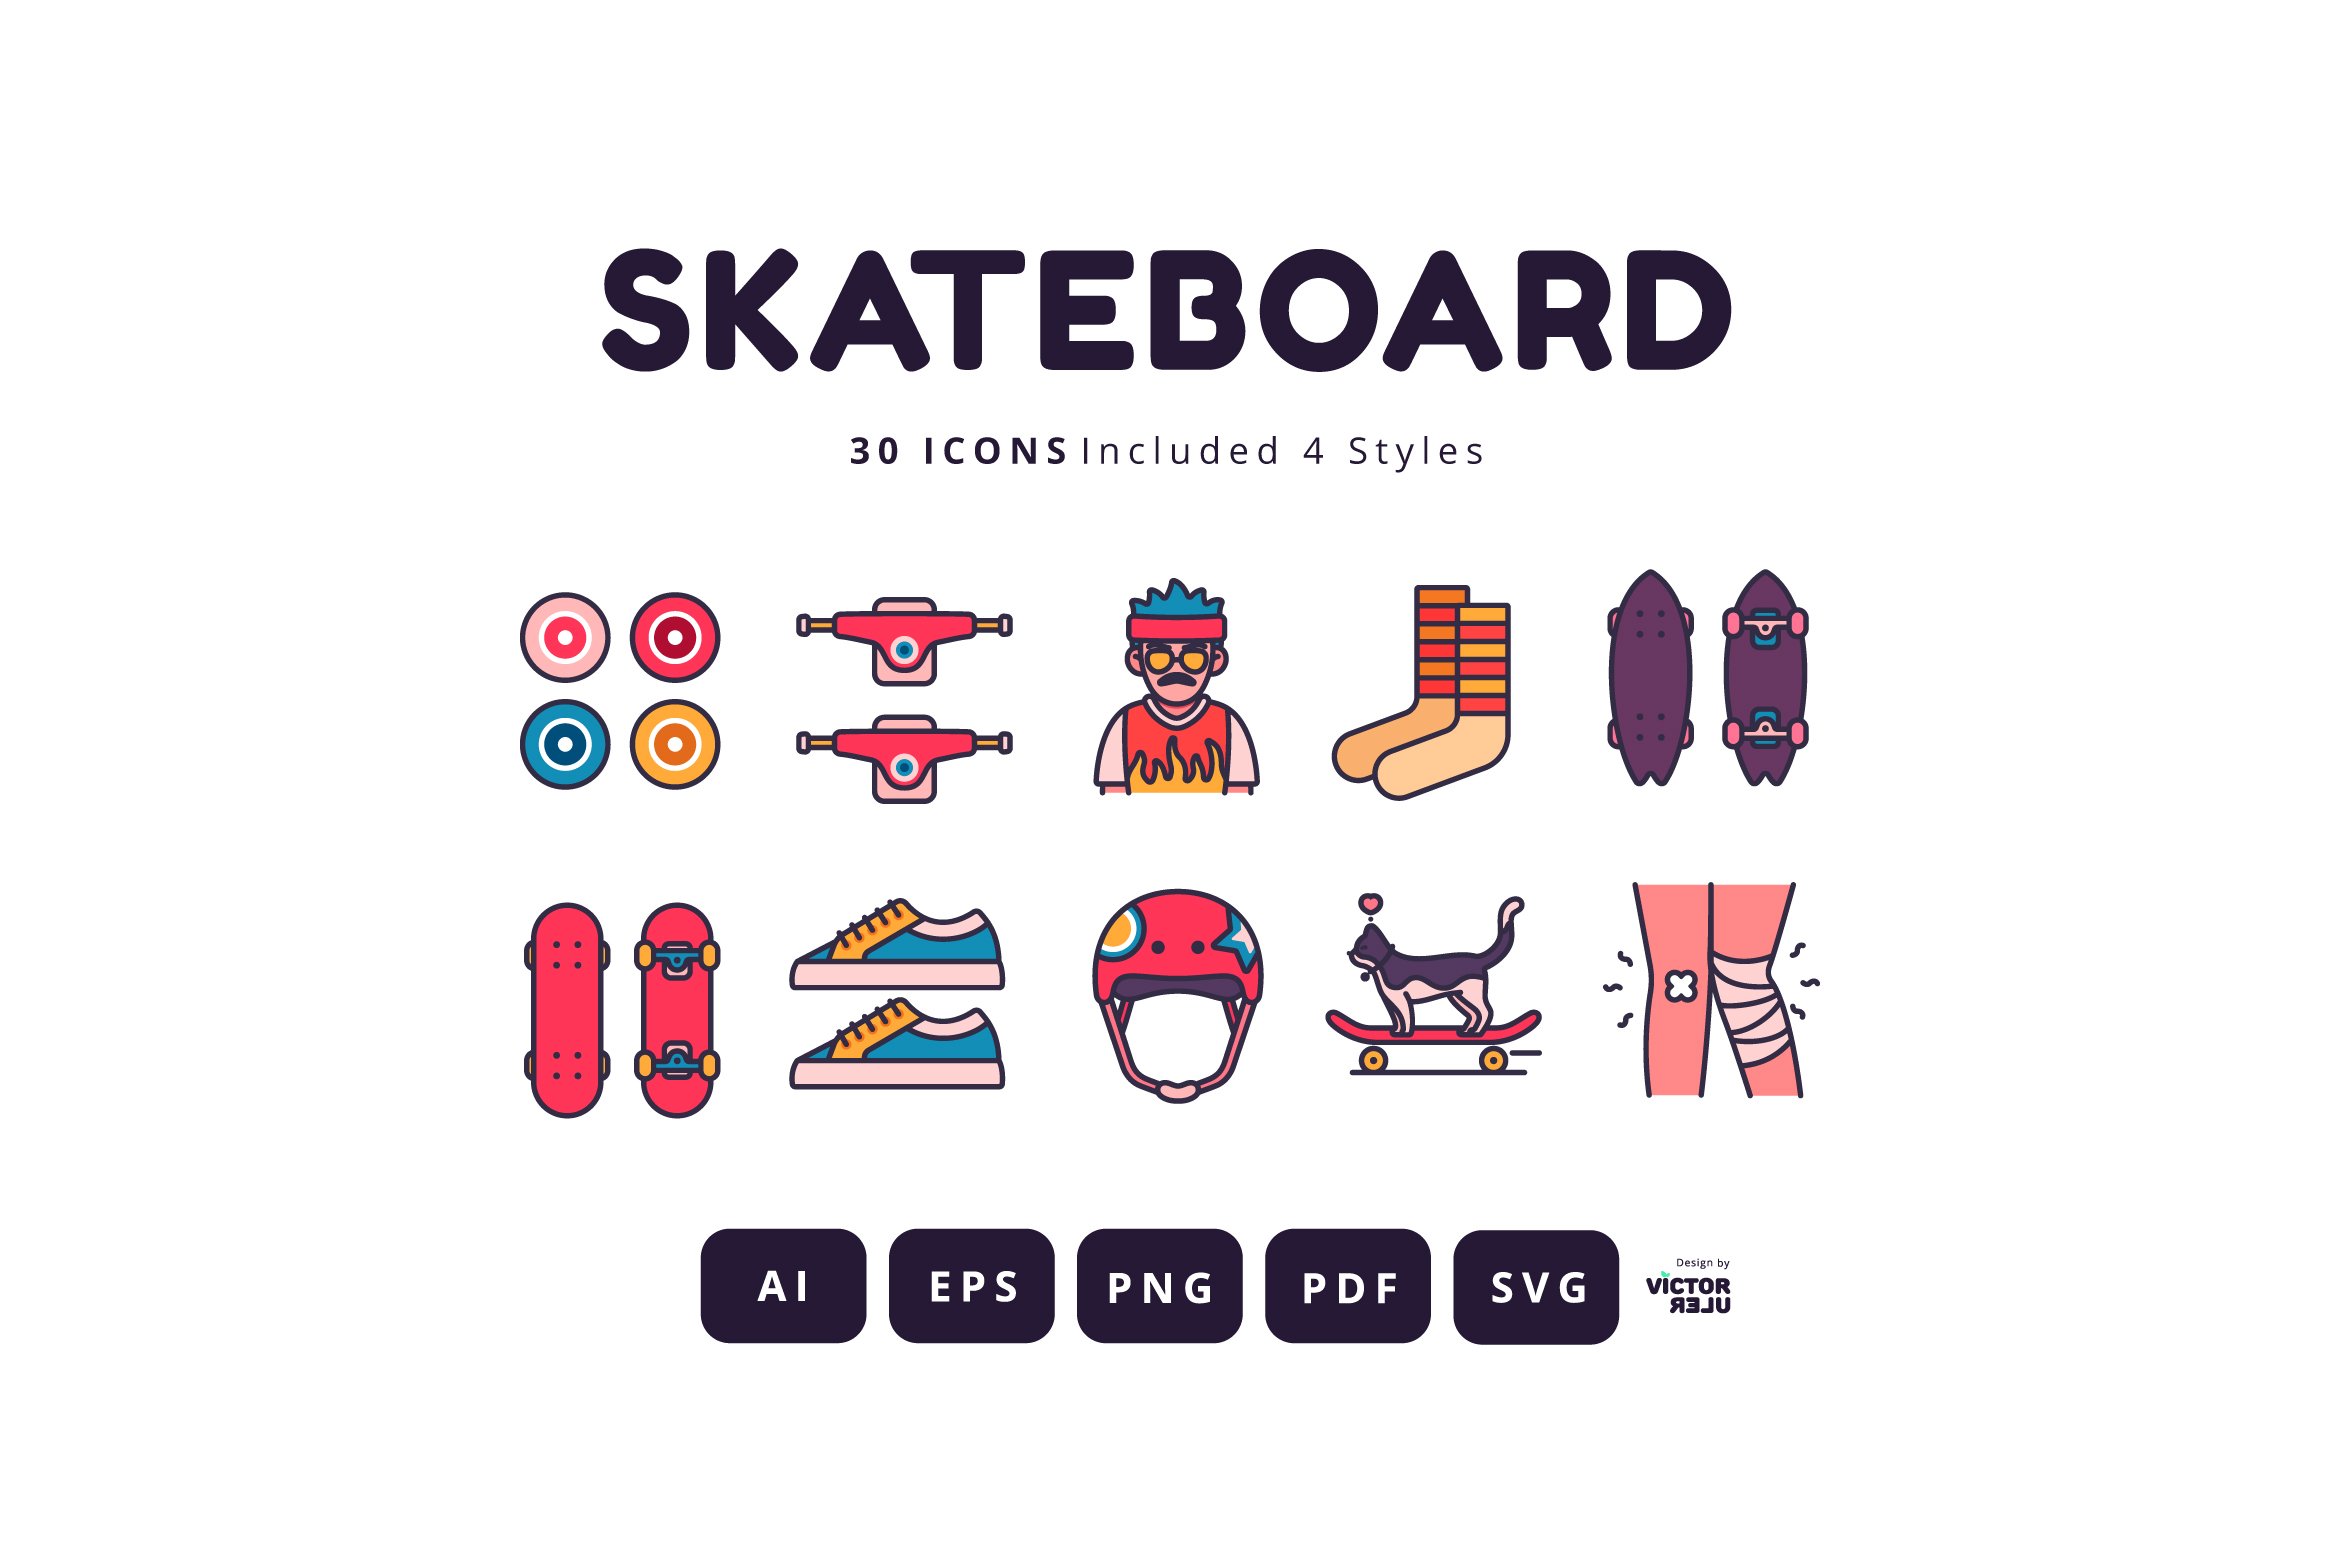 30 Icons Skateboard cover image.